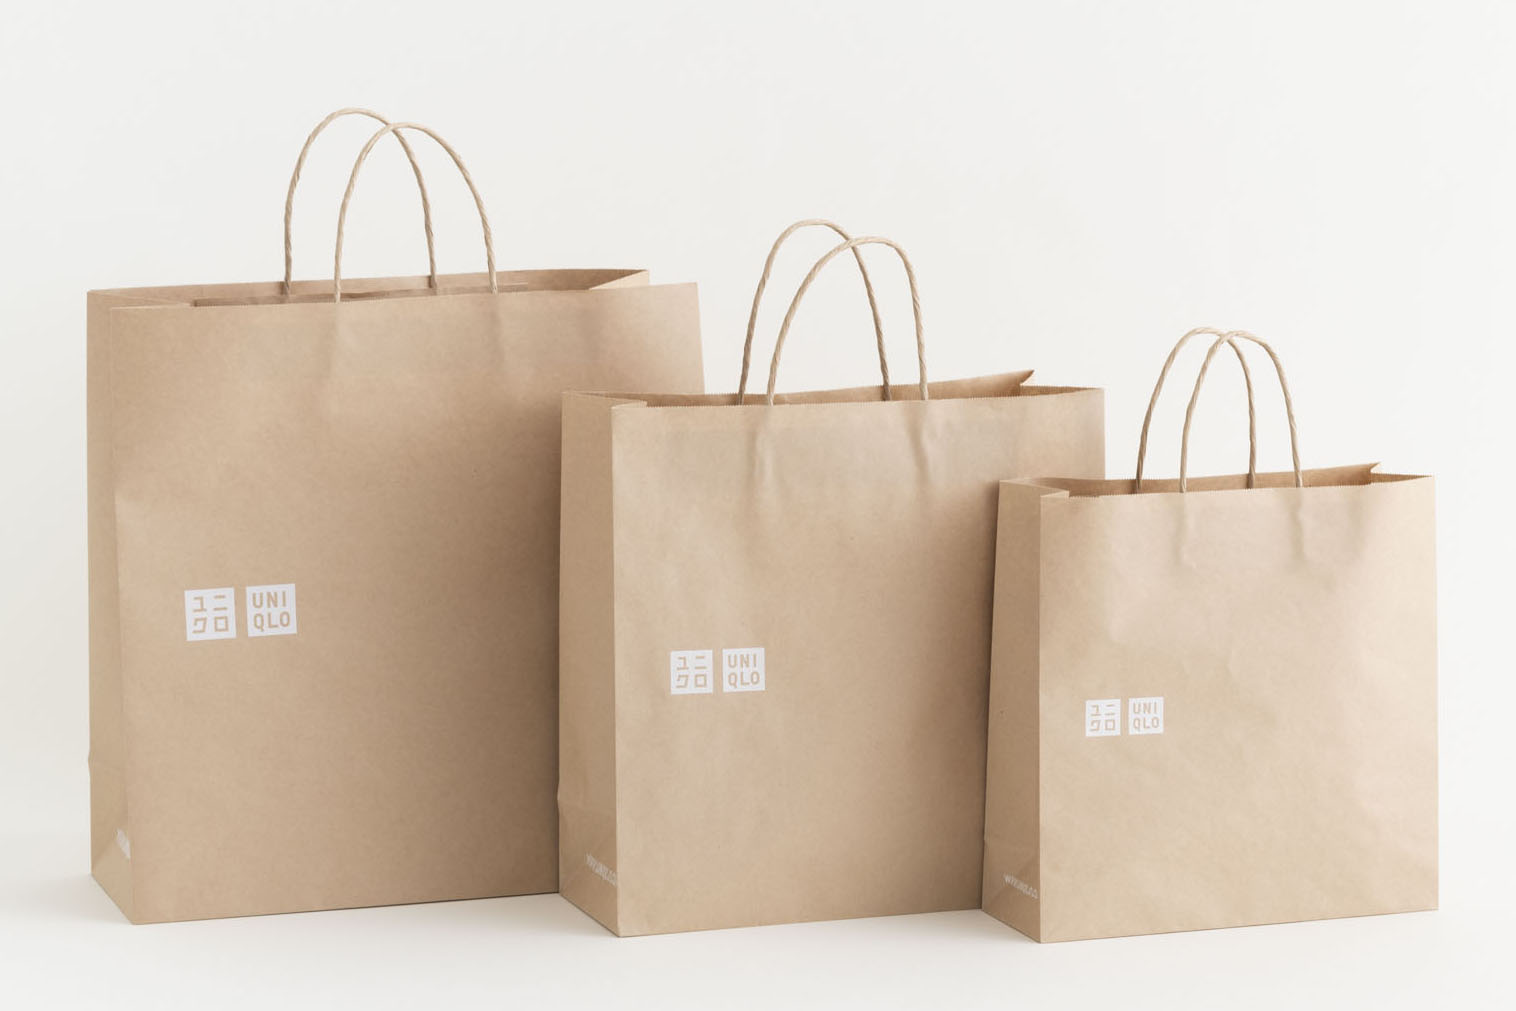 The paper shopping bags made from recycled paper and other eco-friendly materials that Uniqlo plans to introduce globally from September | FAST RETAILING CO. / VIA KYODO